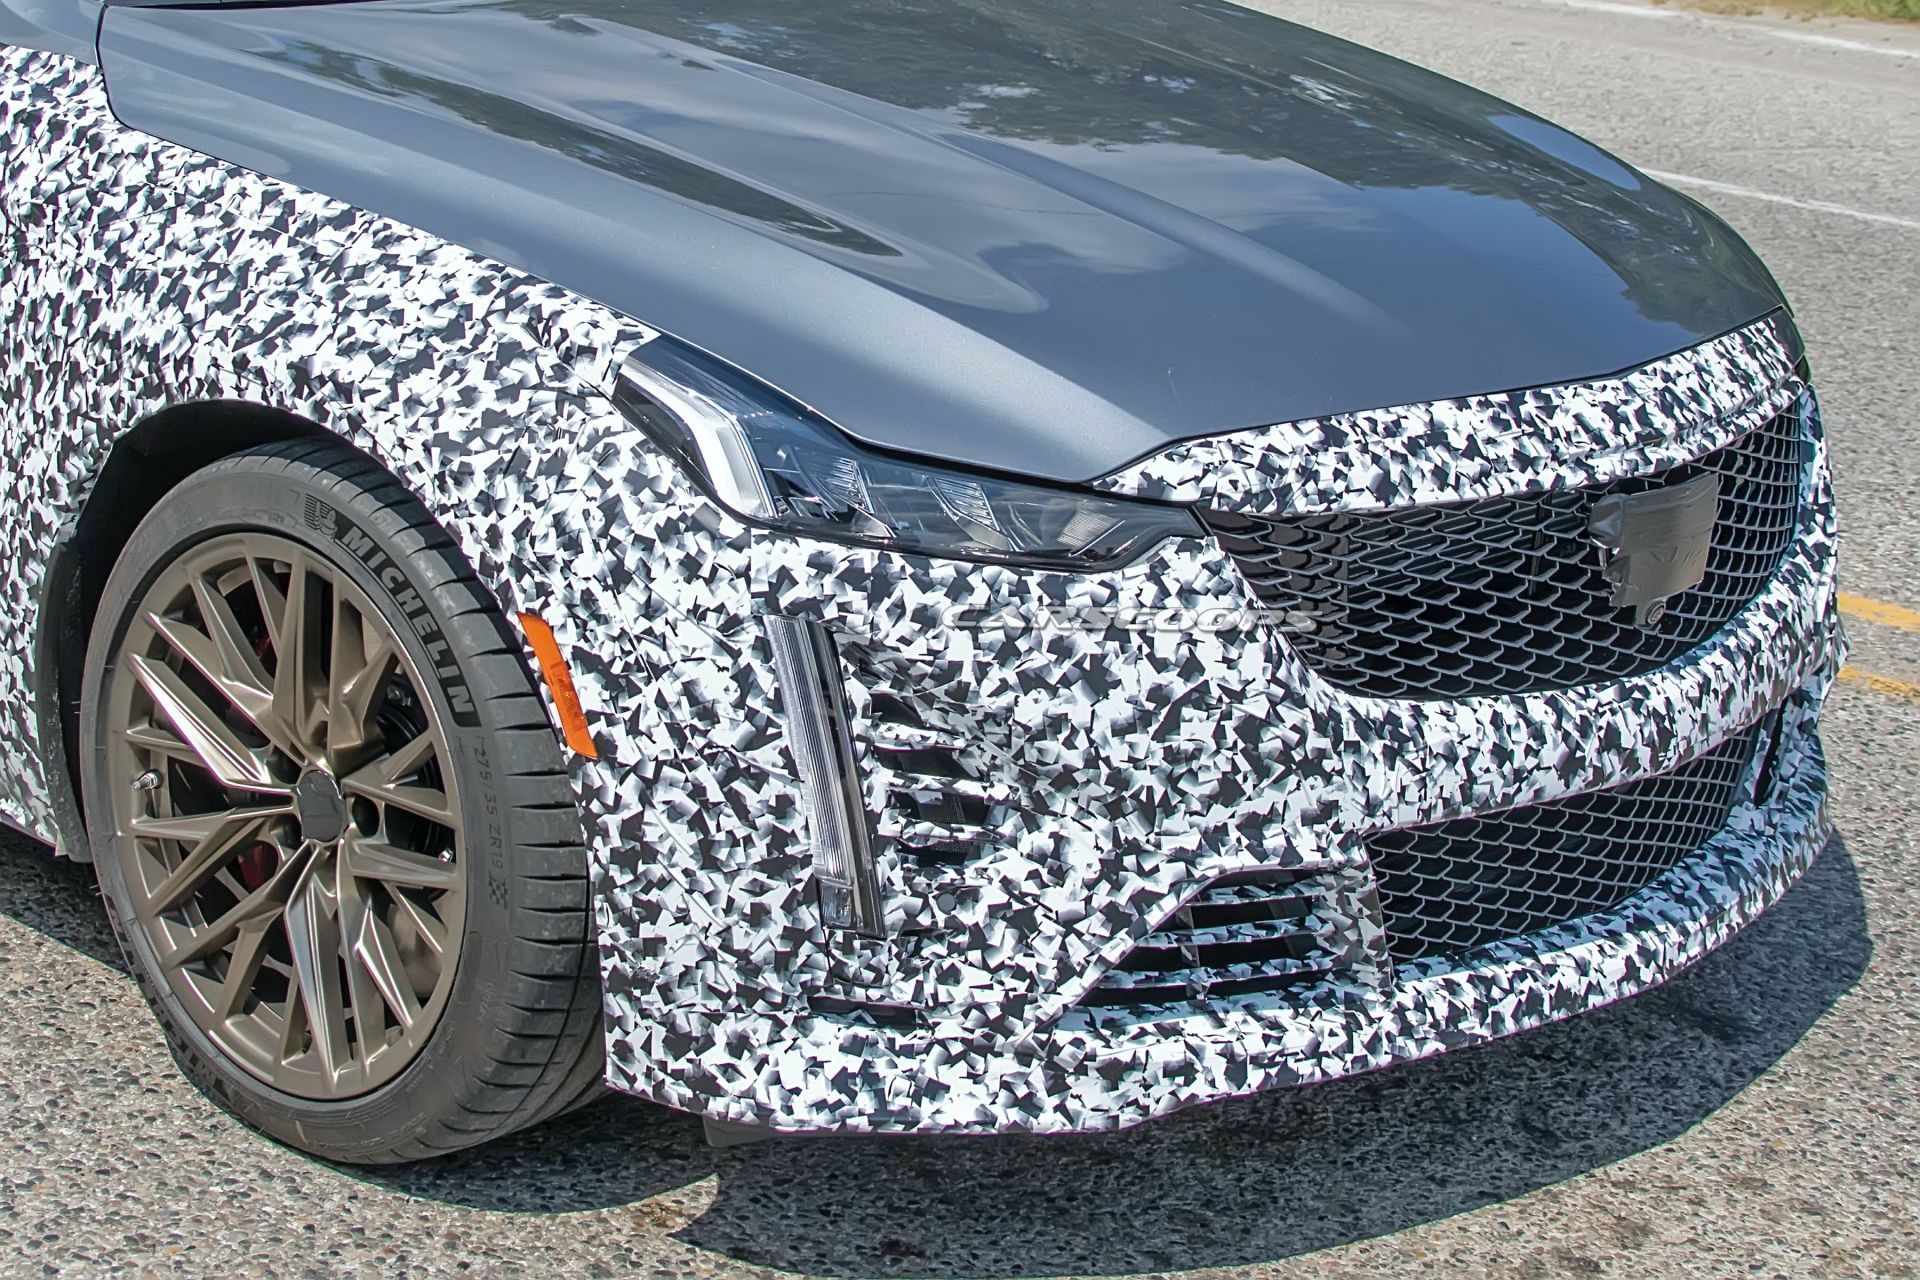 2021 cadillac ct5v blackwing looks the part with 19inch